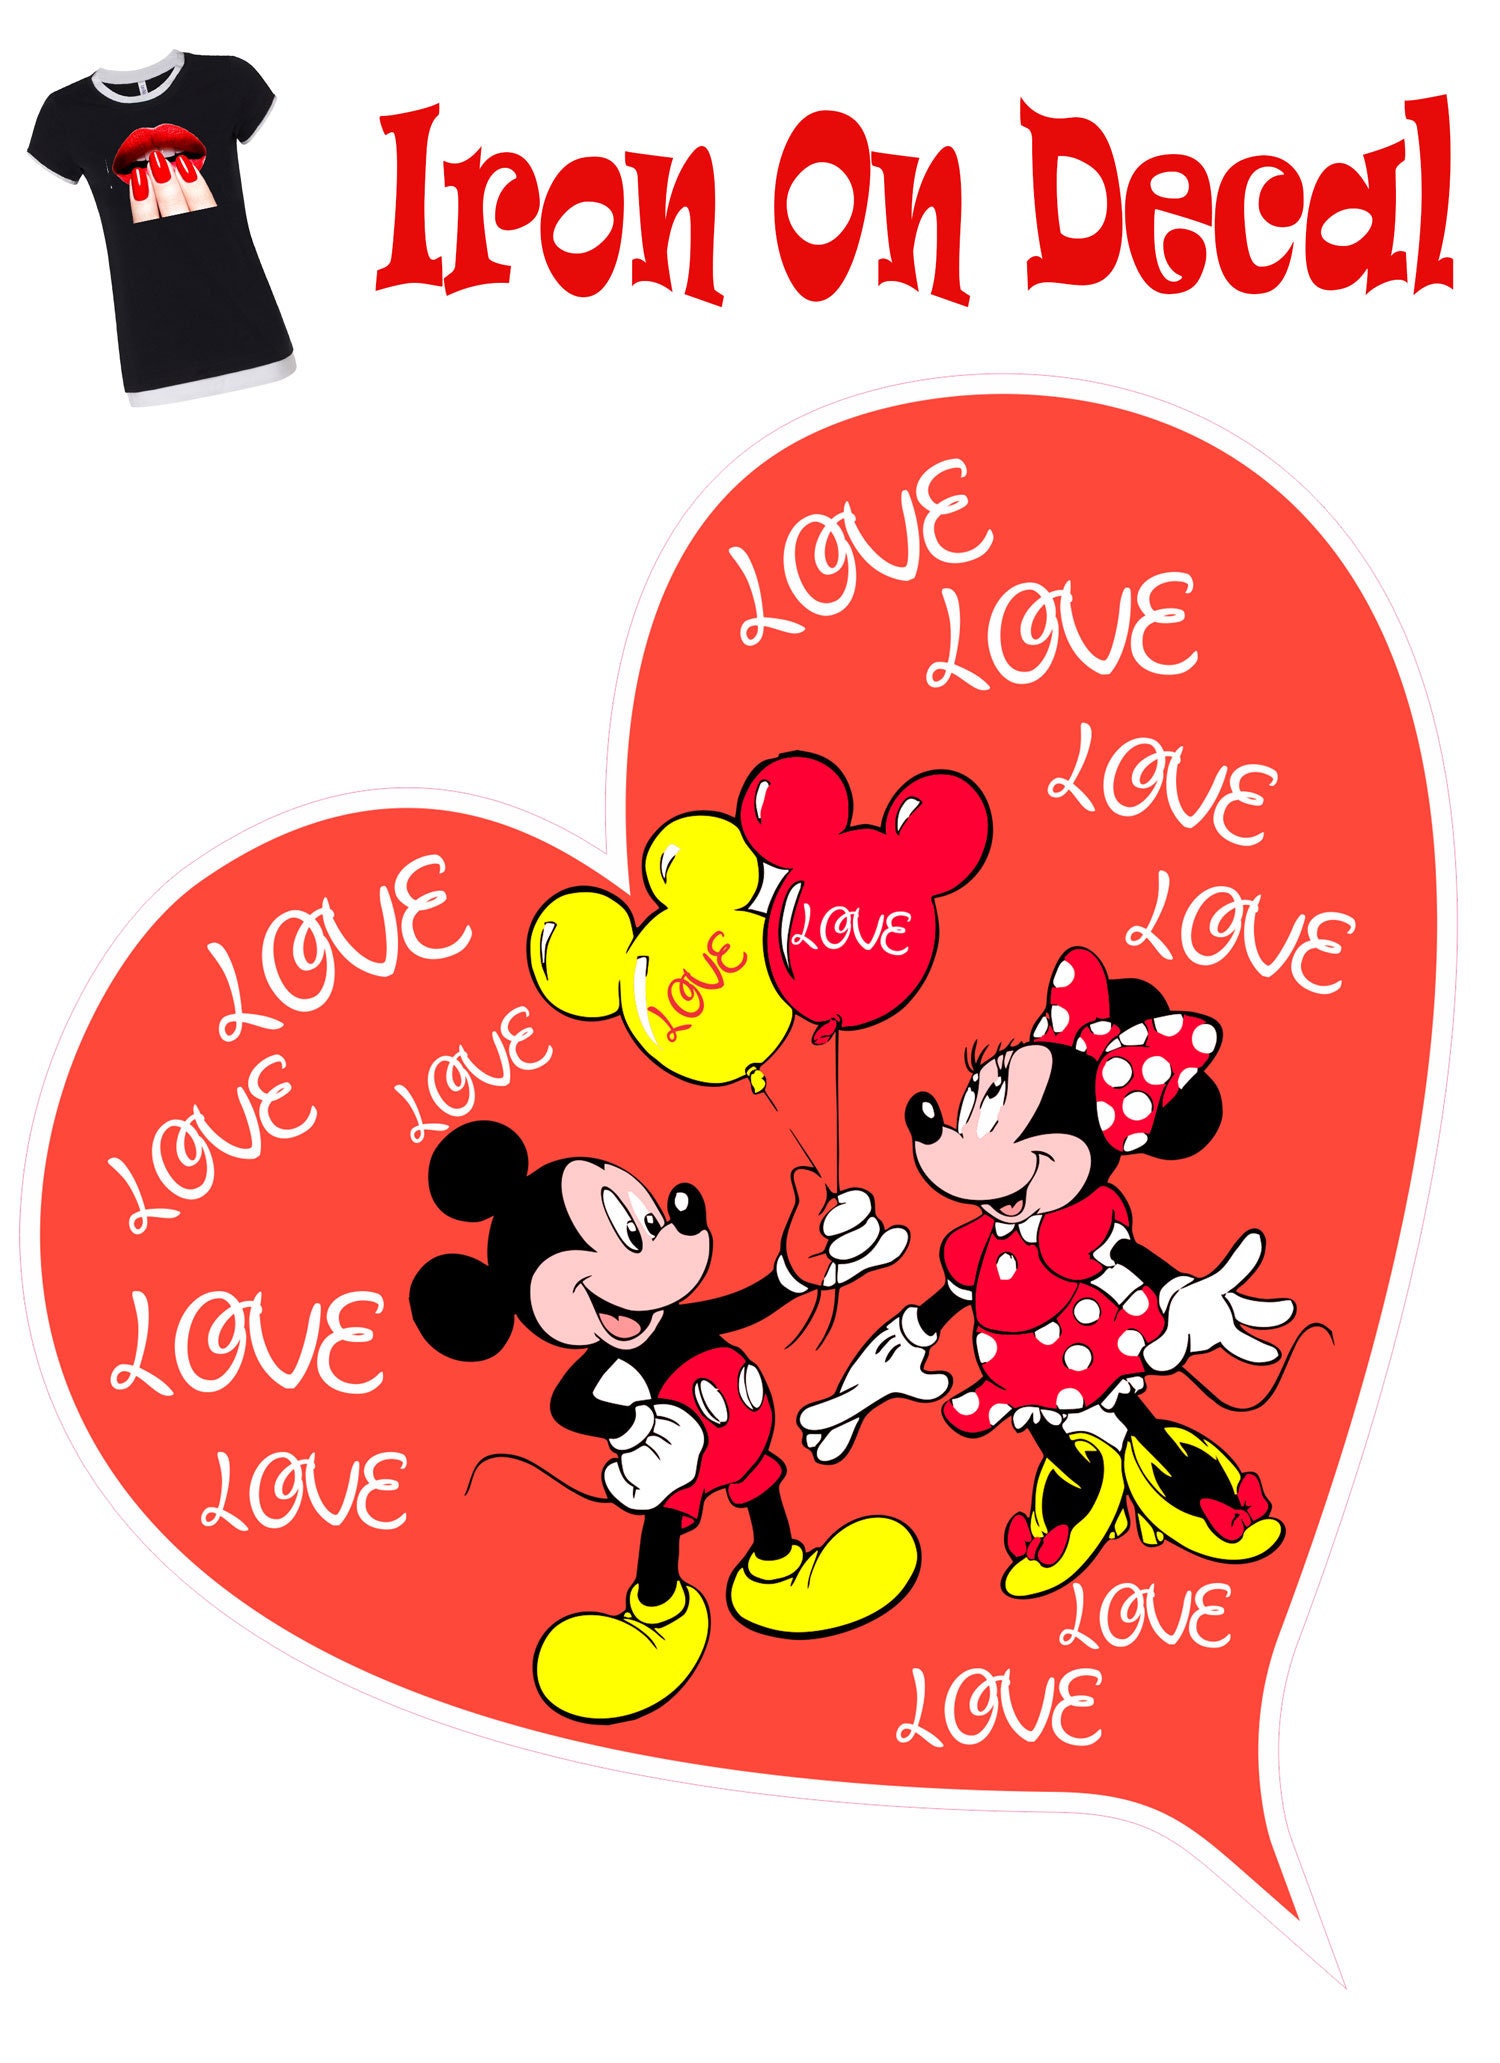 Mickey Mouse Heart Iron-on Sew-on Embroidered Patch, Custom Patch, Limited  Edition Patch, Patches, Pins, Embroidered Costume Cosplay Disney 